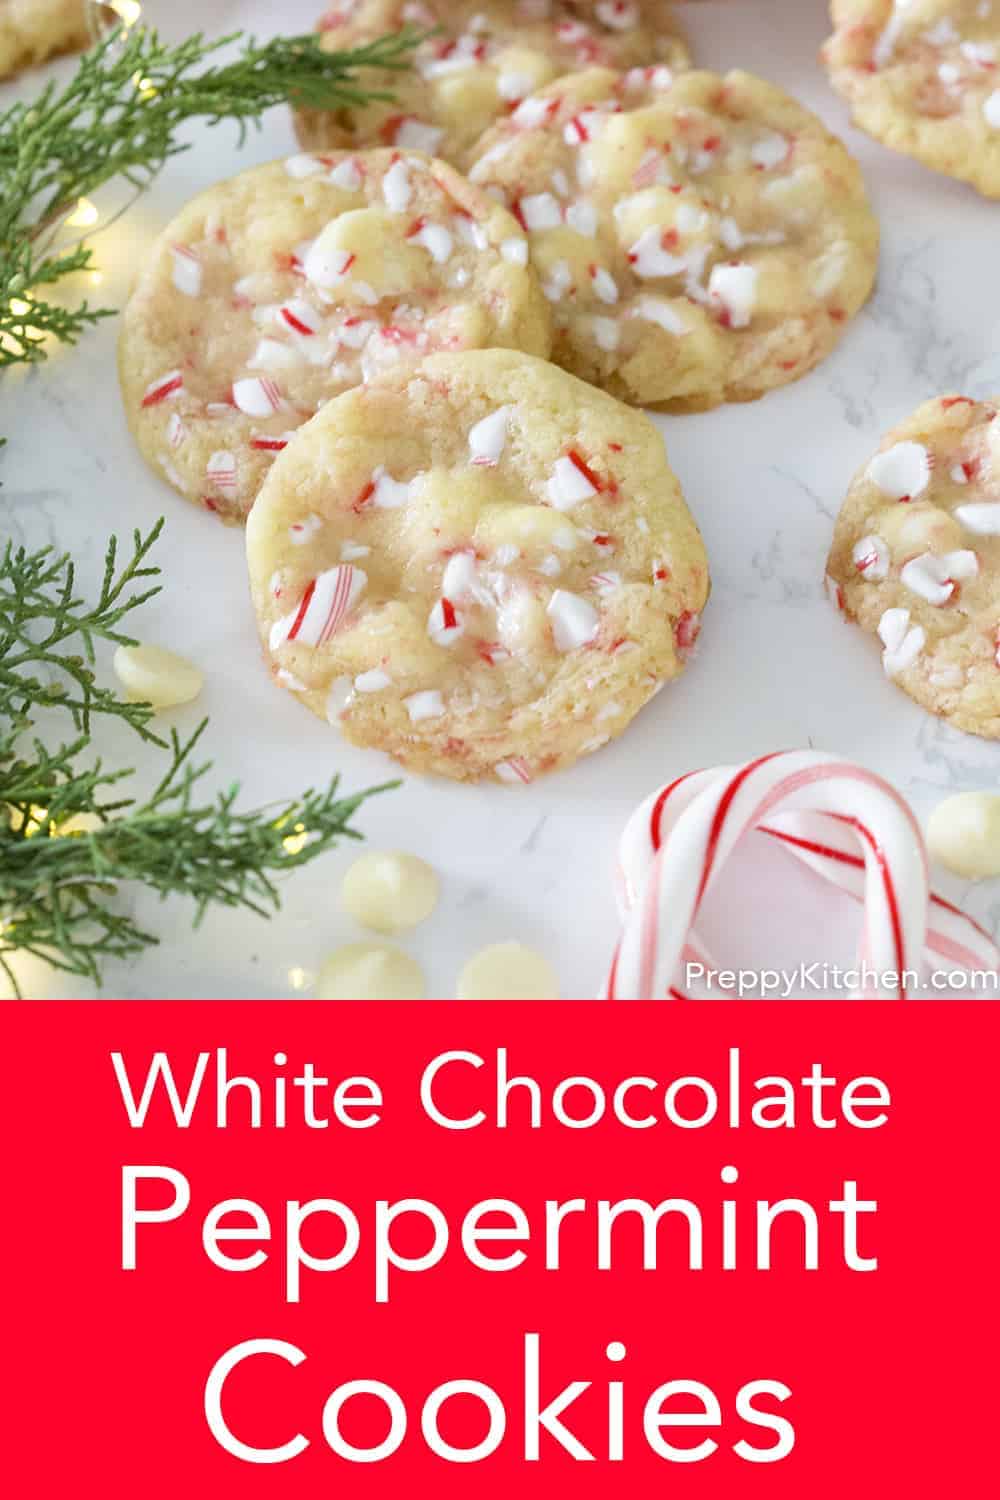 White Chocolate Peppermint Cookies - Preppy Kitchen